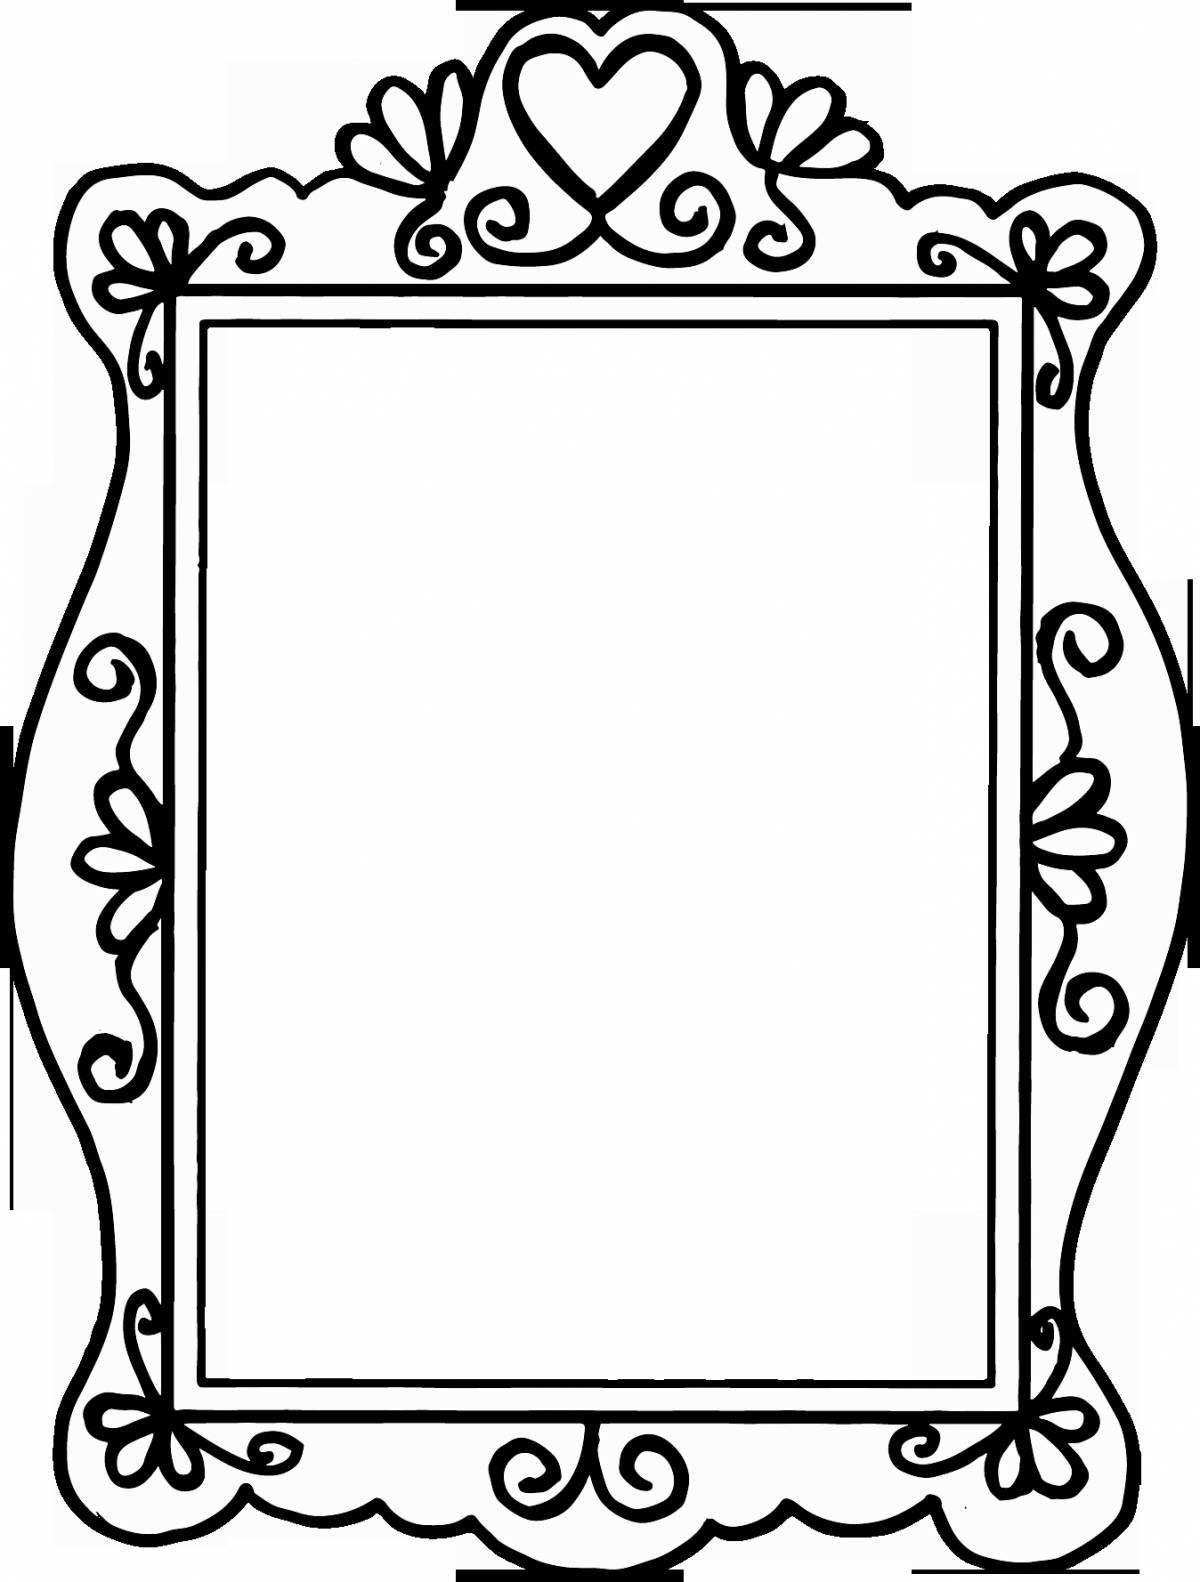 Blissful Mirror Coloring Page for Children